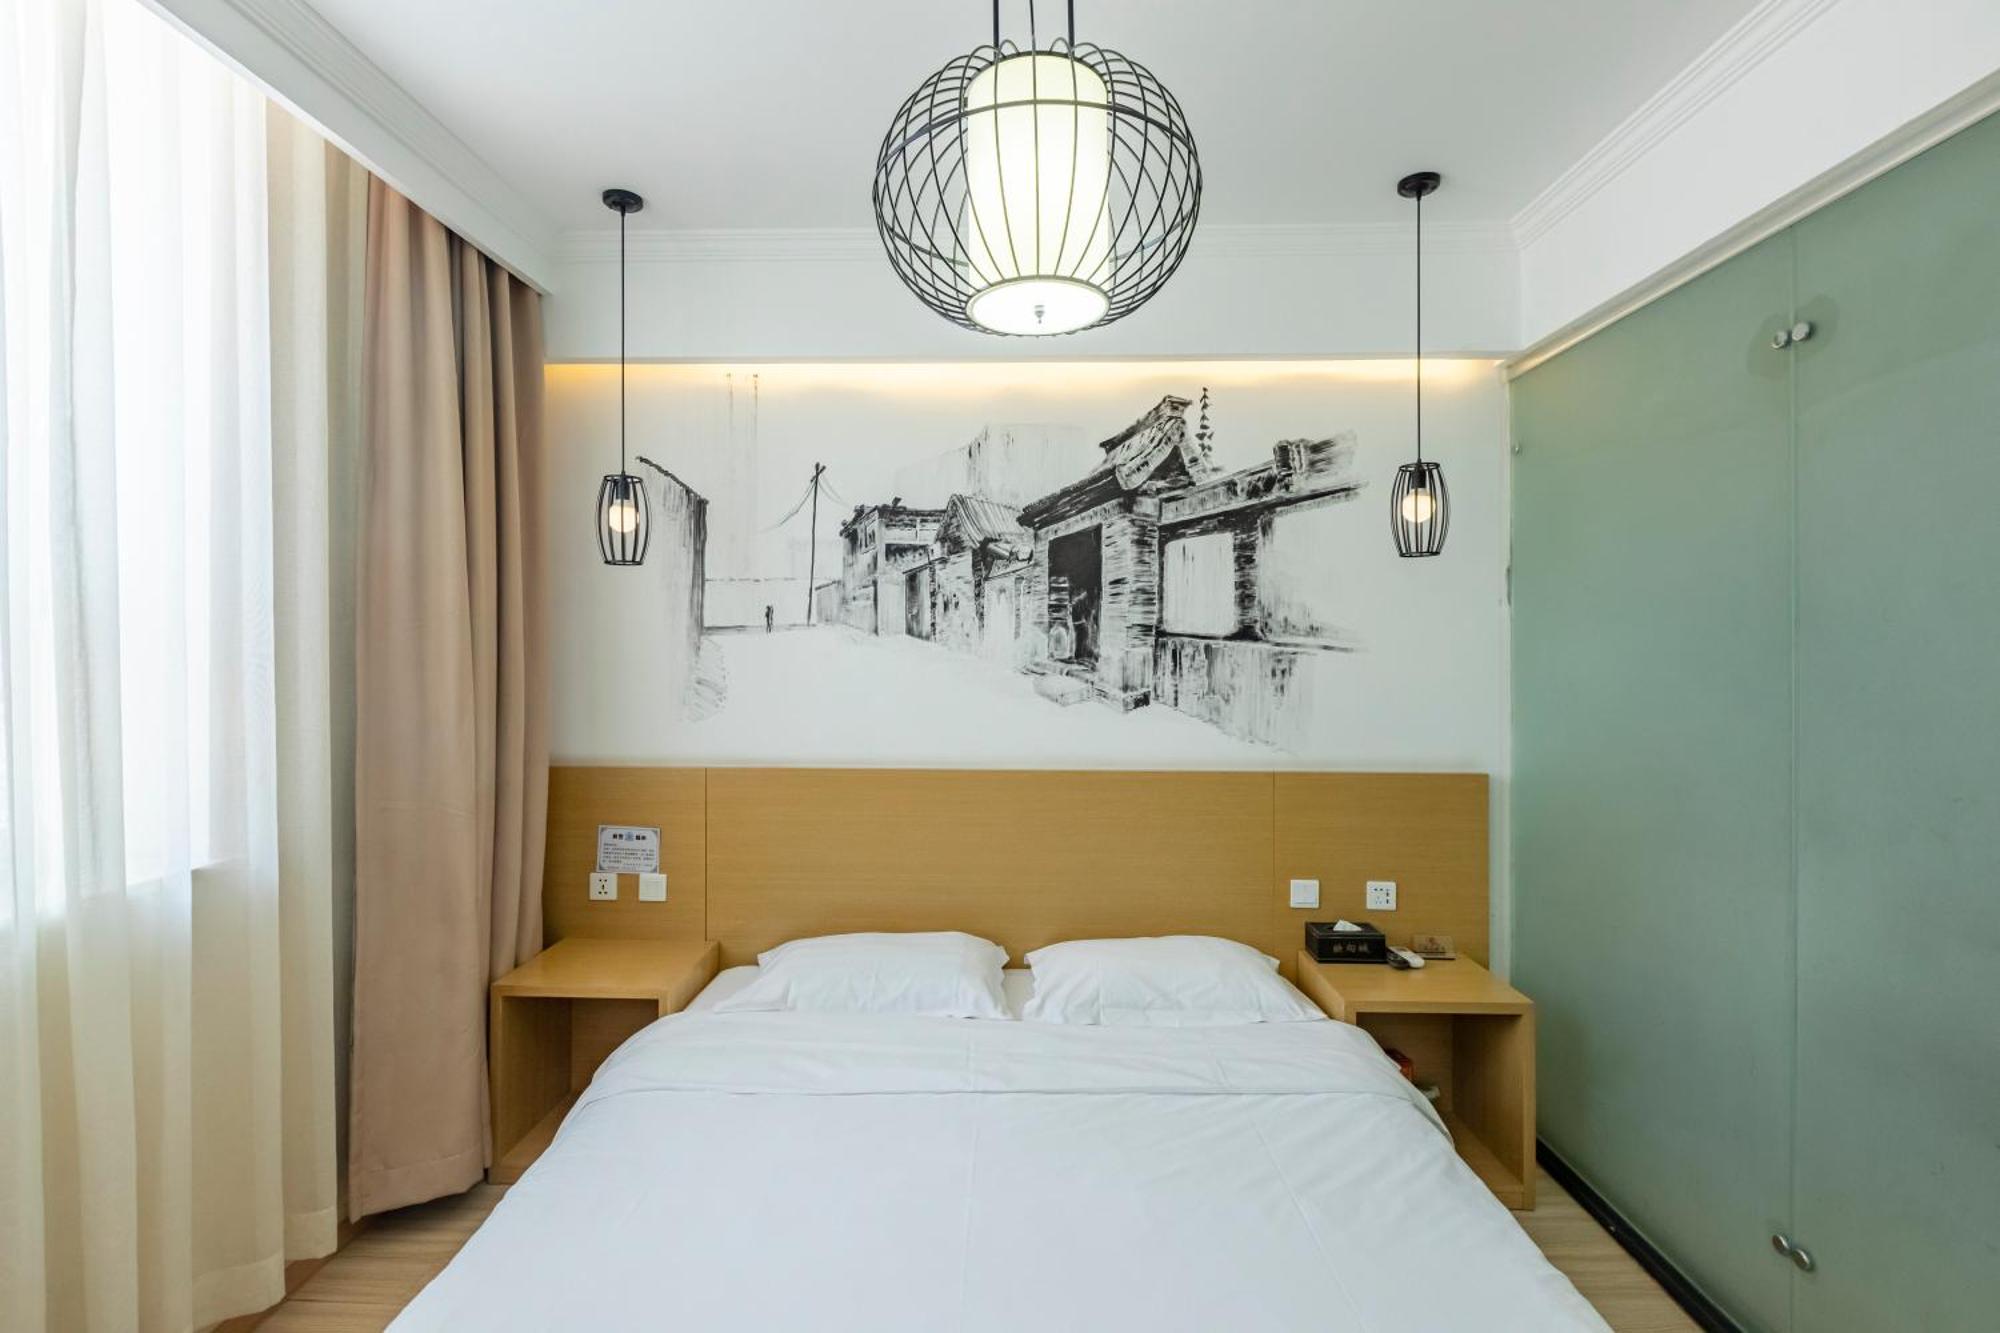 Happy Dragon Alley Hotel-In The City Center With Big Window&Free Coffe, Fluent English Speaking,Tourist Attractions Ticket Service&Food Recommendation,Near Tian Anmen Forbiddencity,Near Lama Temple,Easy To Walk To Nanluoalley&Shichahai Пекин Экстерьер фото